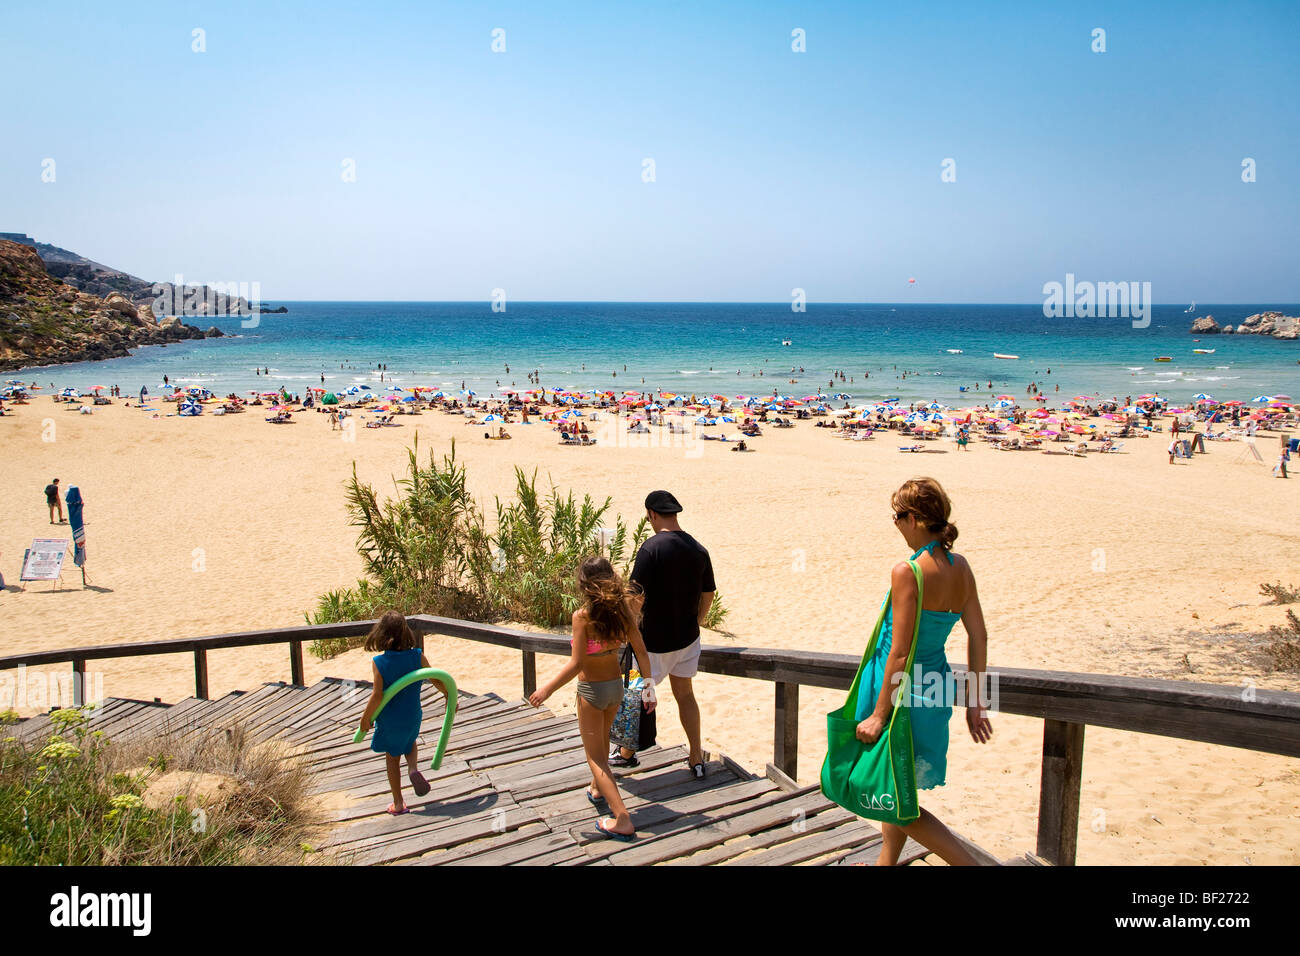 People going downstairs to the beach, Golden Bay, Malta, Europe Stock Photo